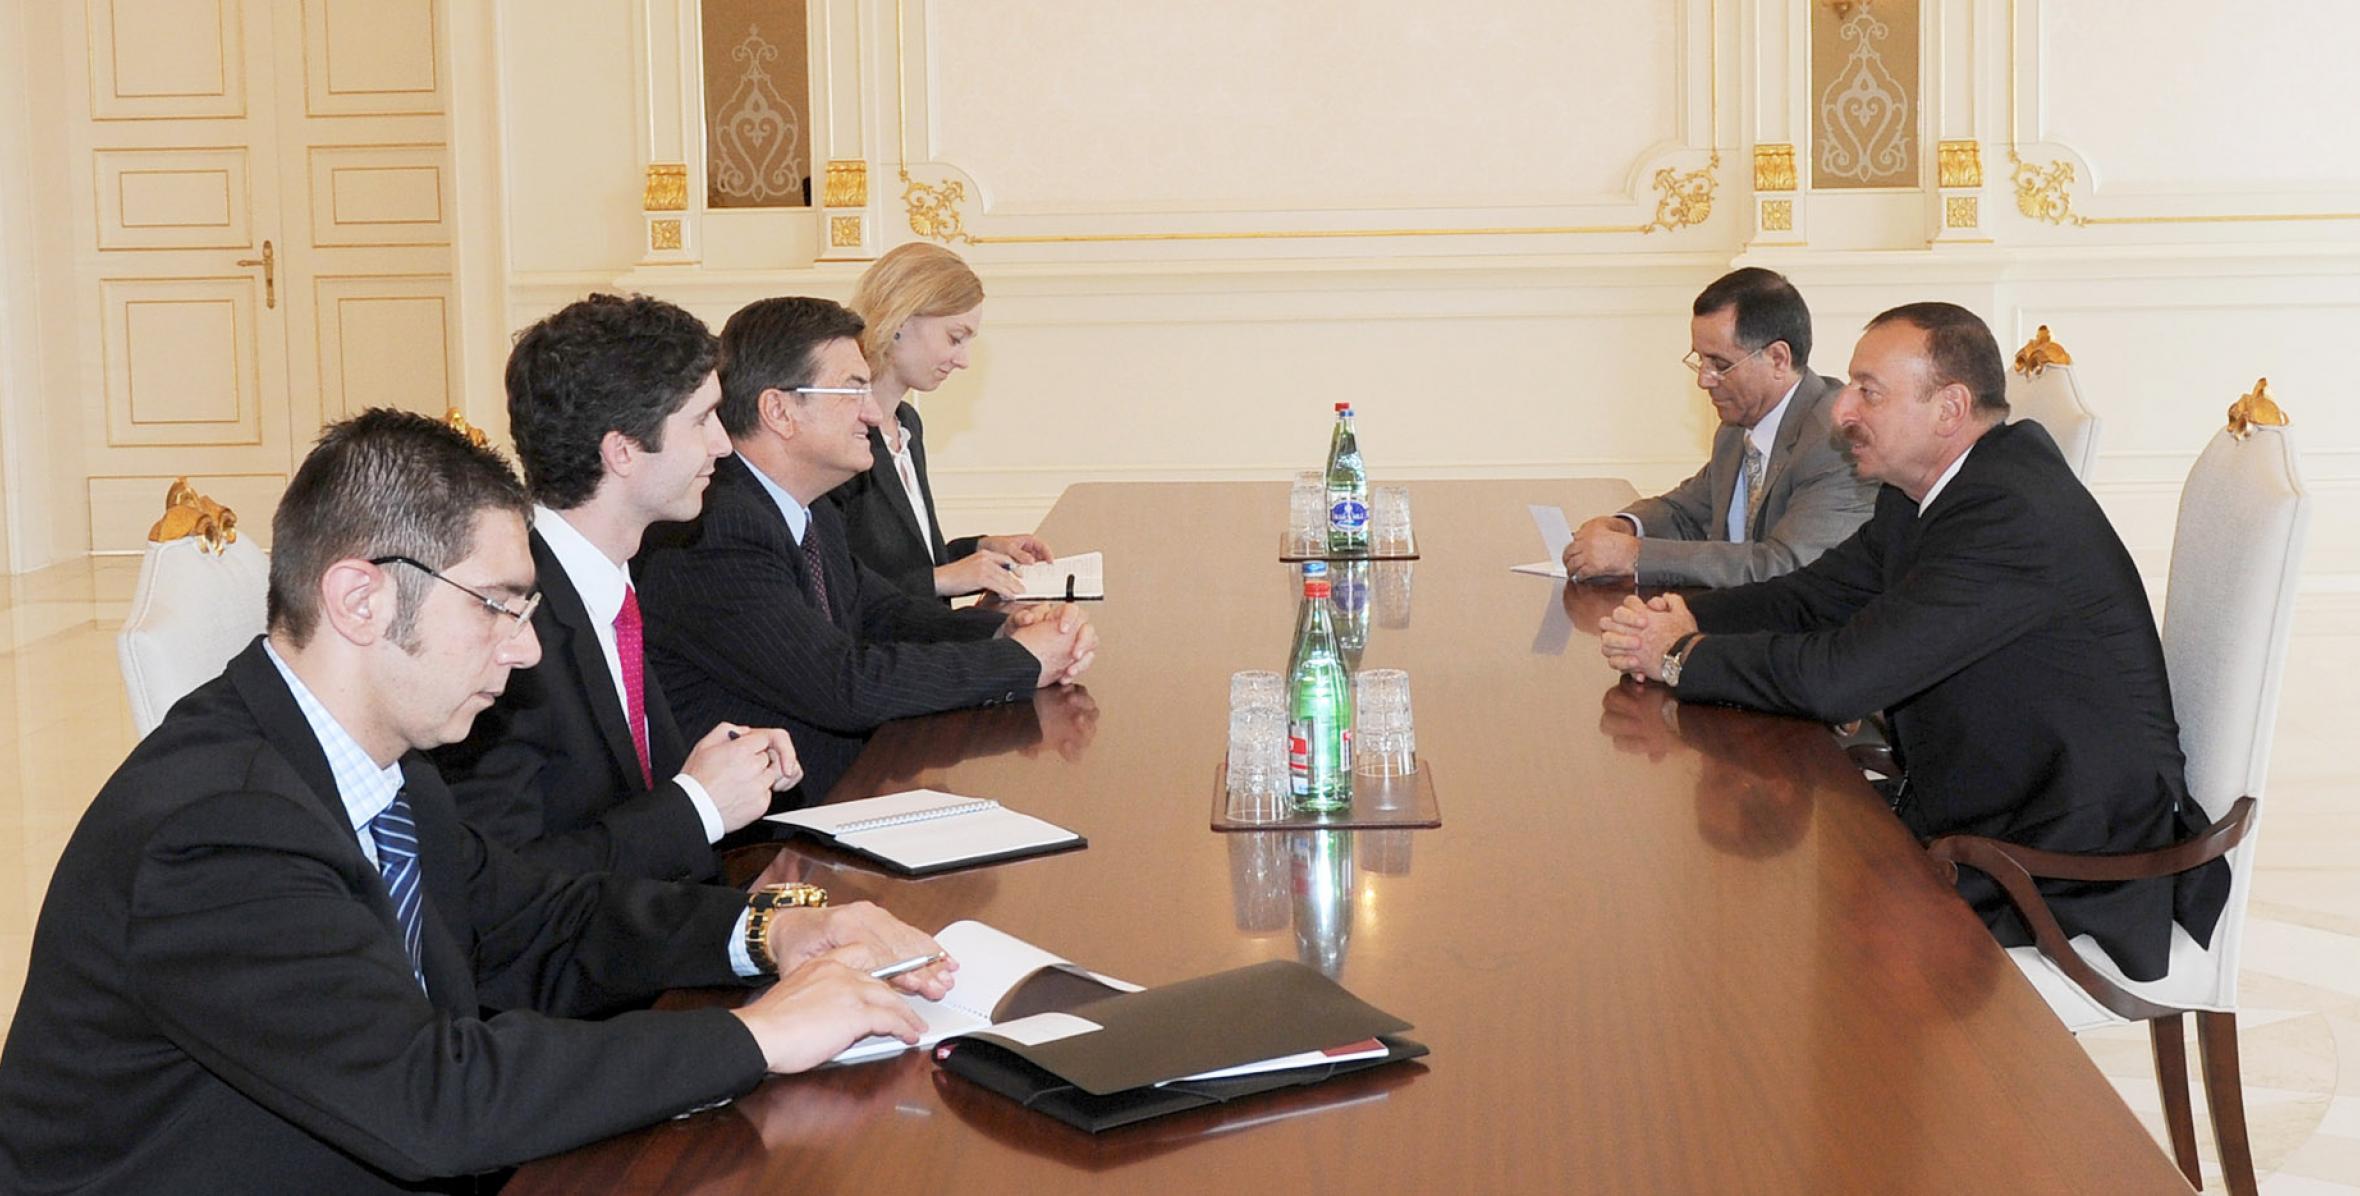 Ilham Aliyev received a delegation led by President of the Parliamentary Assembly of the OSCE, Petros Efthymiou